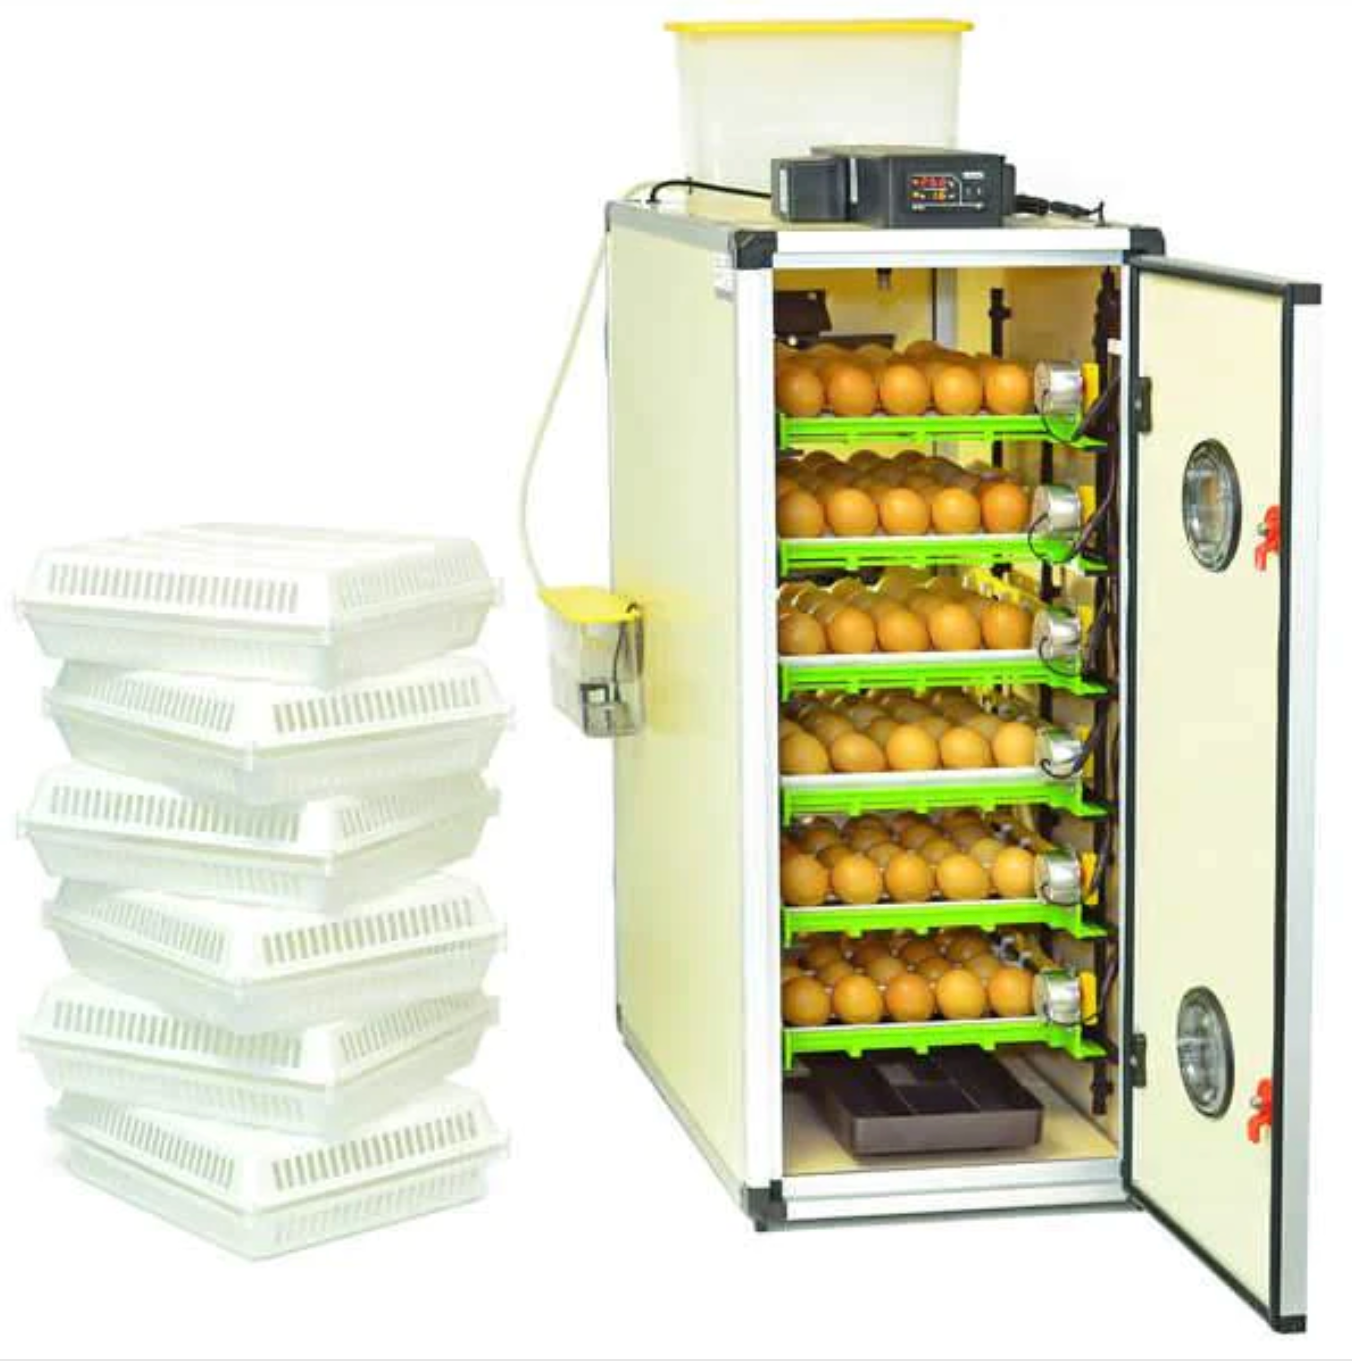 Hatching Time CT180SH Incubator - Setter and Hatcher